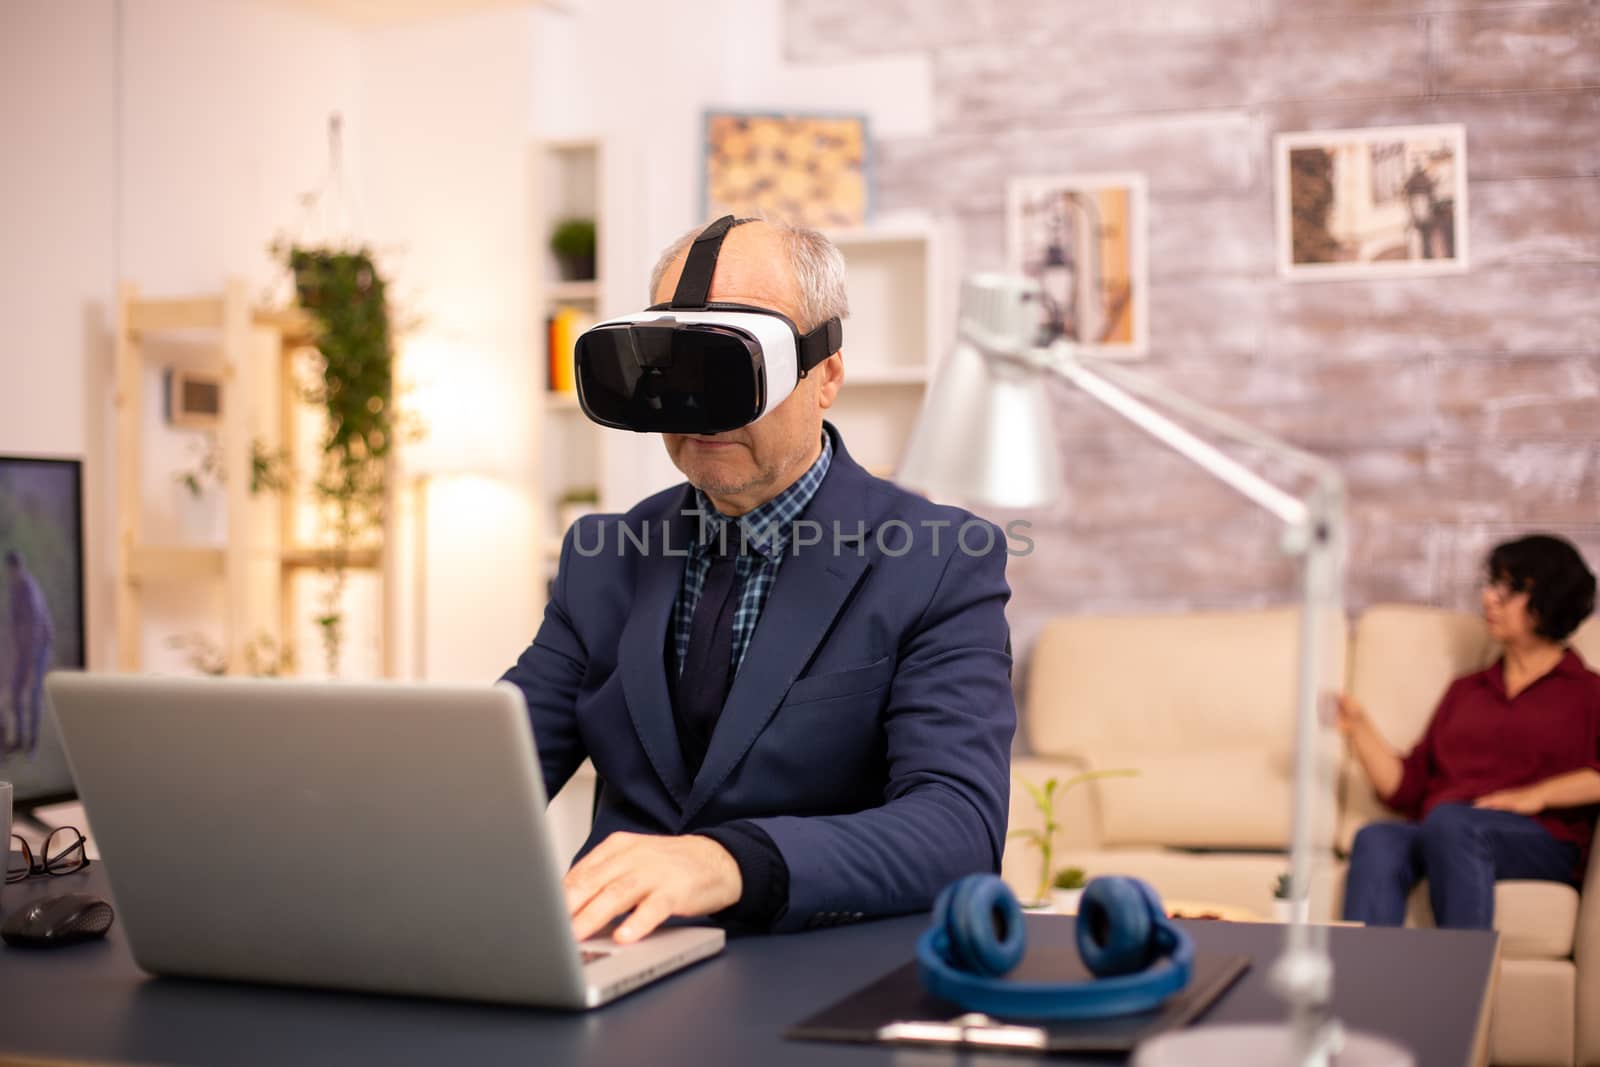 Elderly man experiencing new virtual reality technology for the first time in his home